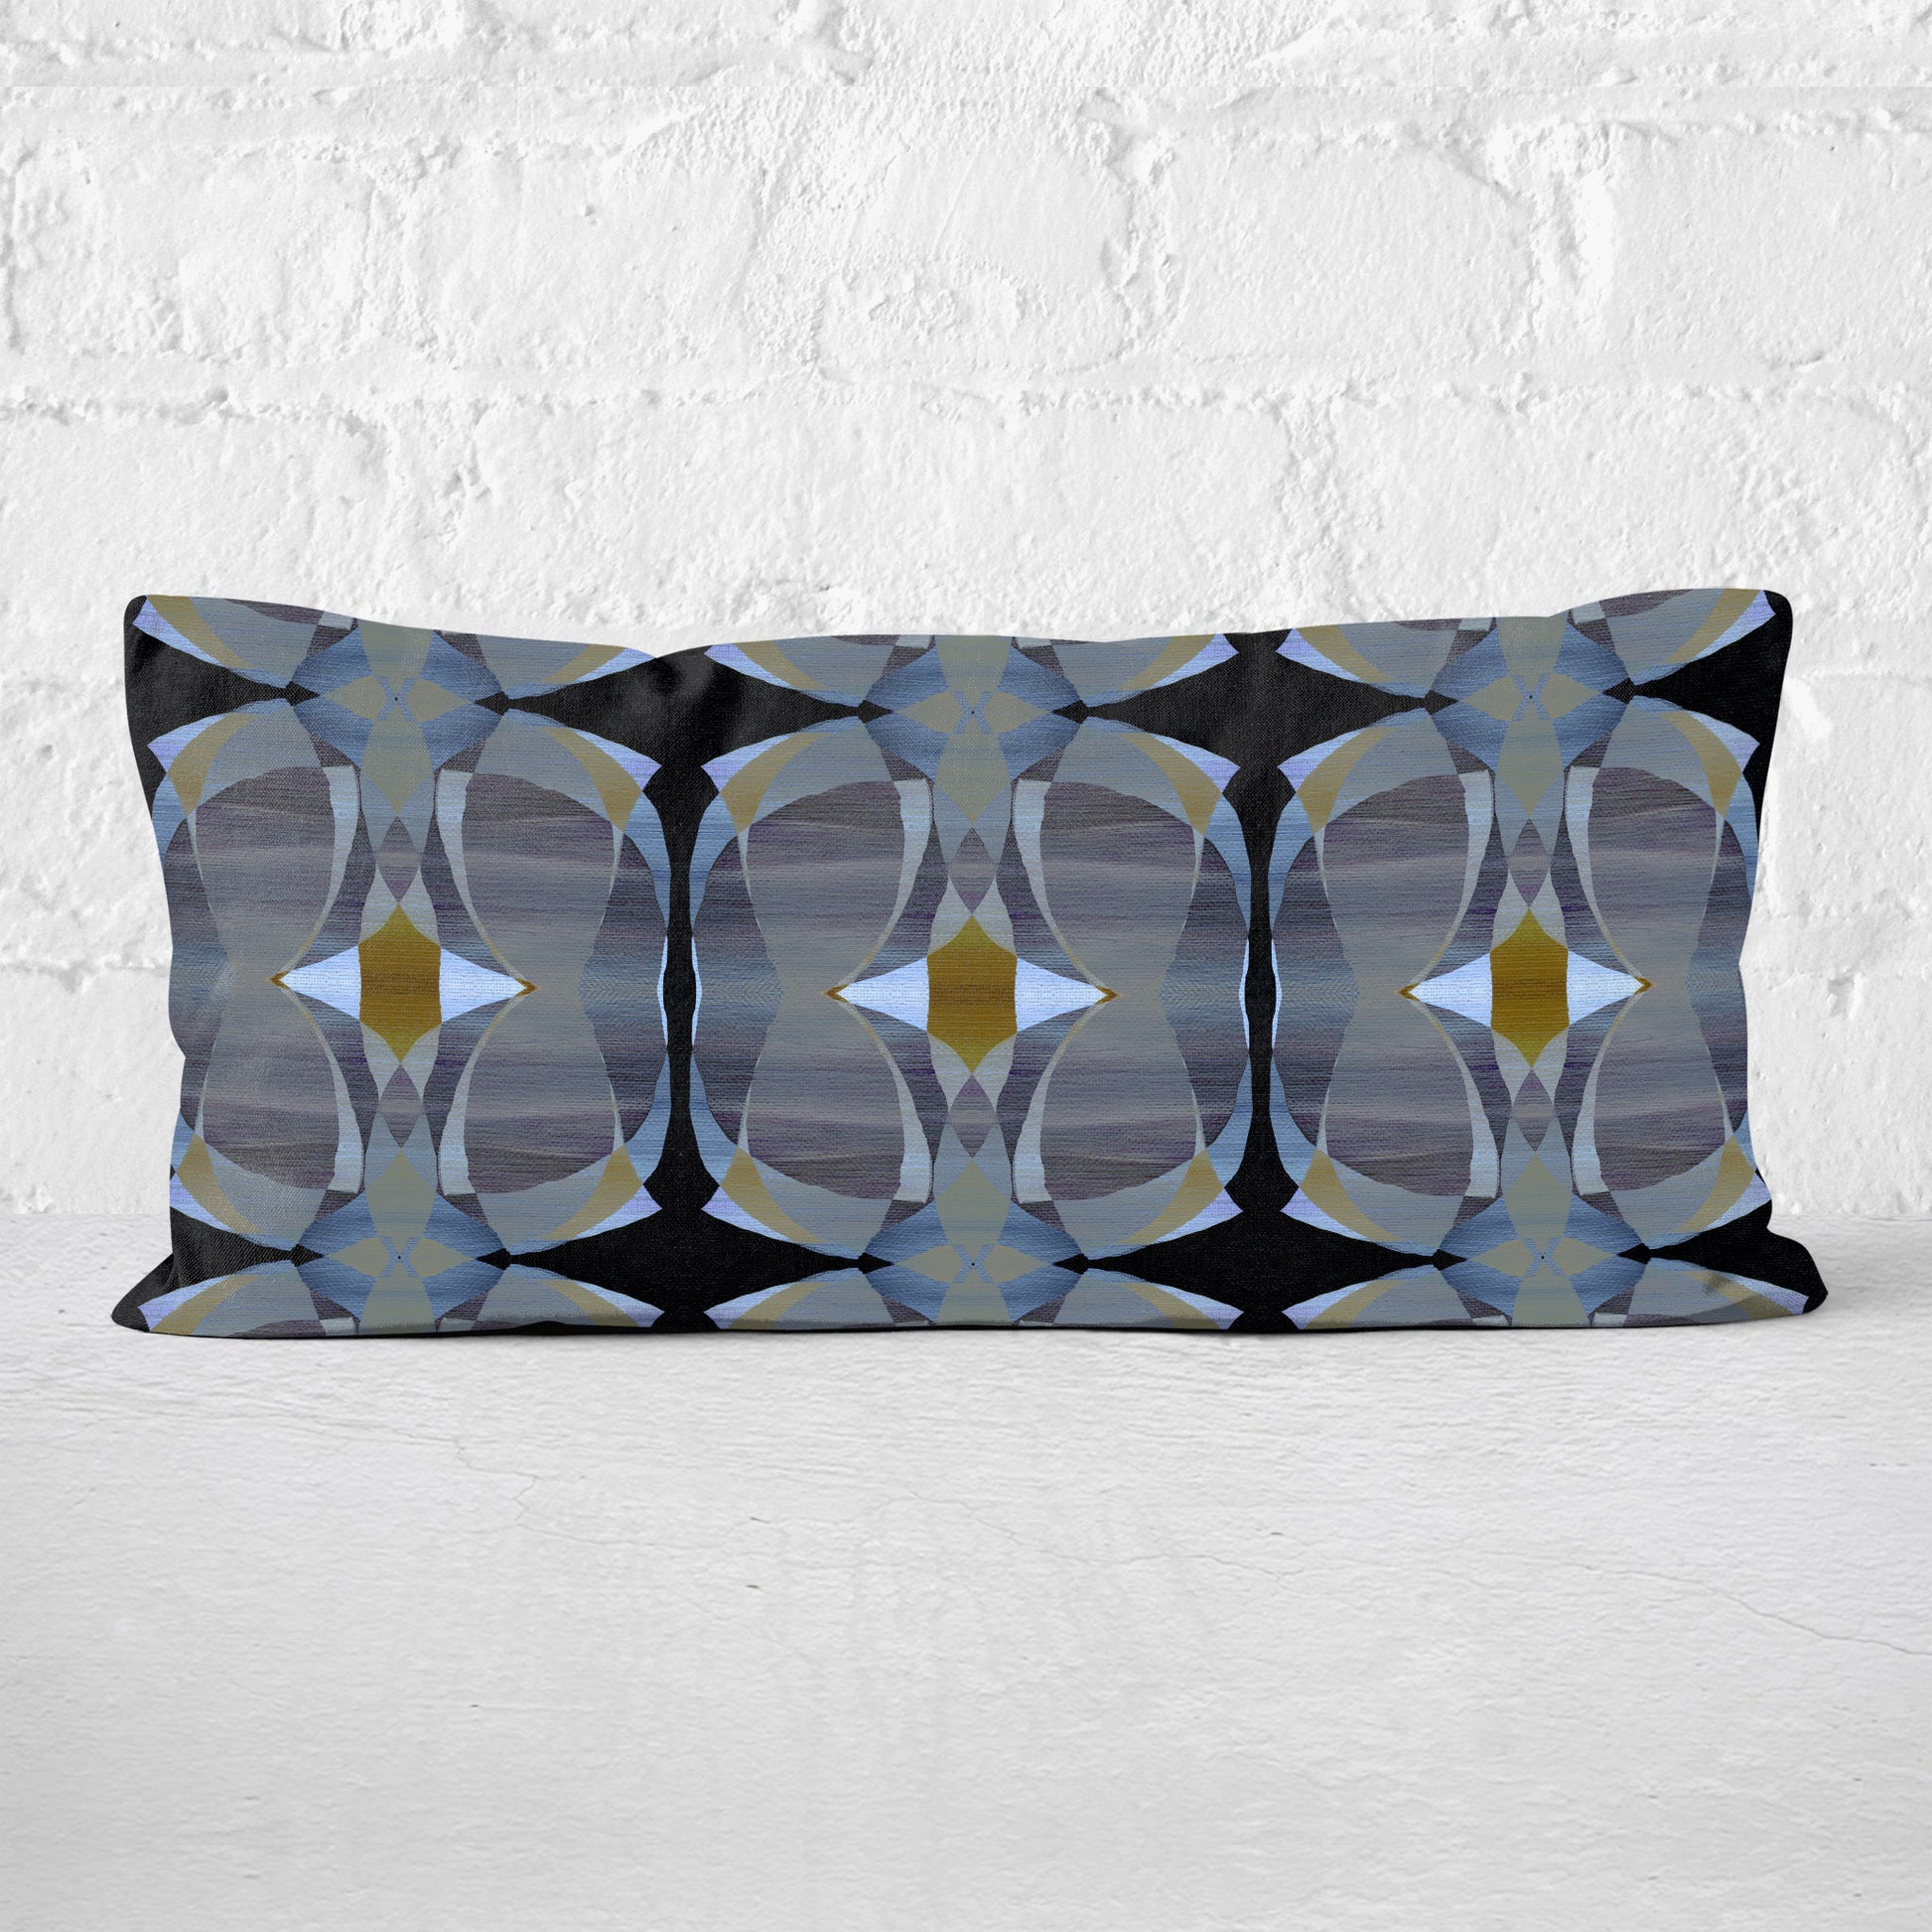 Rectangular lumbar pillow featuring a hand-painted pattern in black, grey, and gold tones.